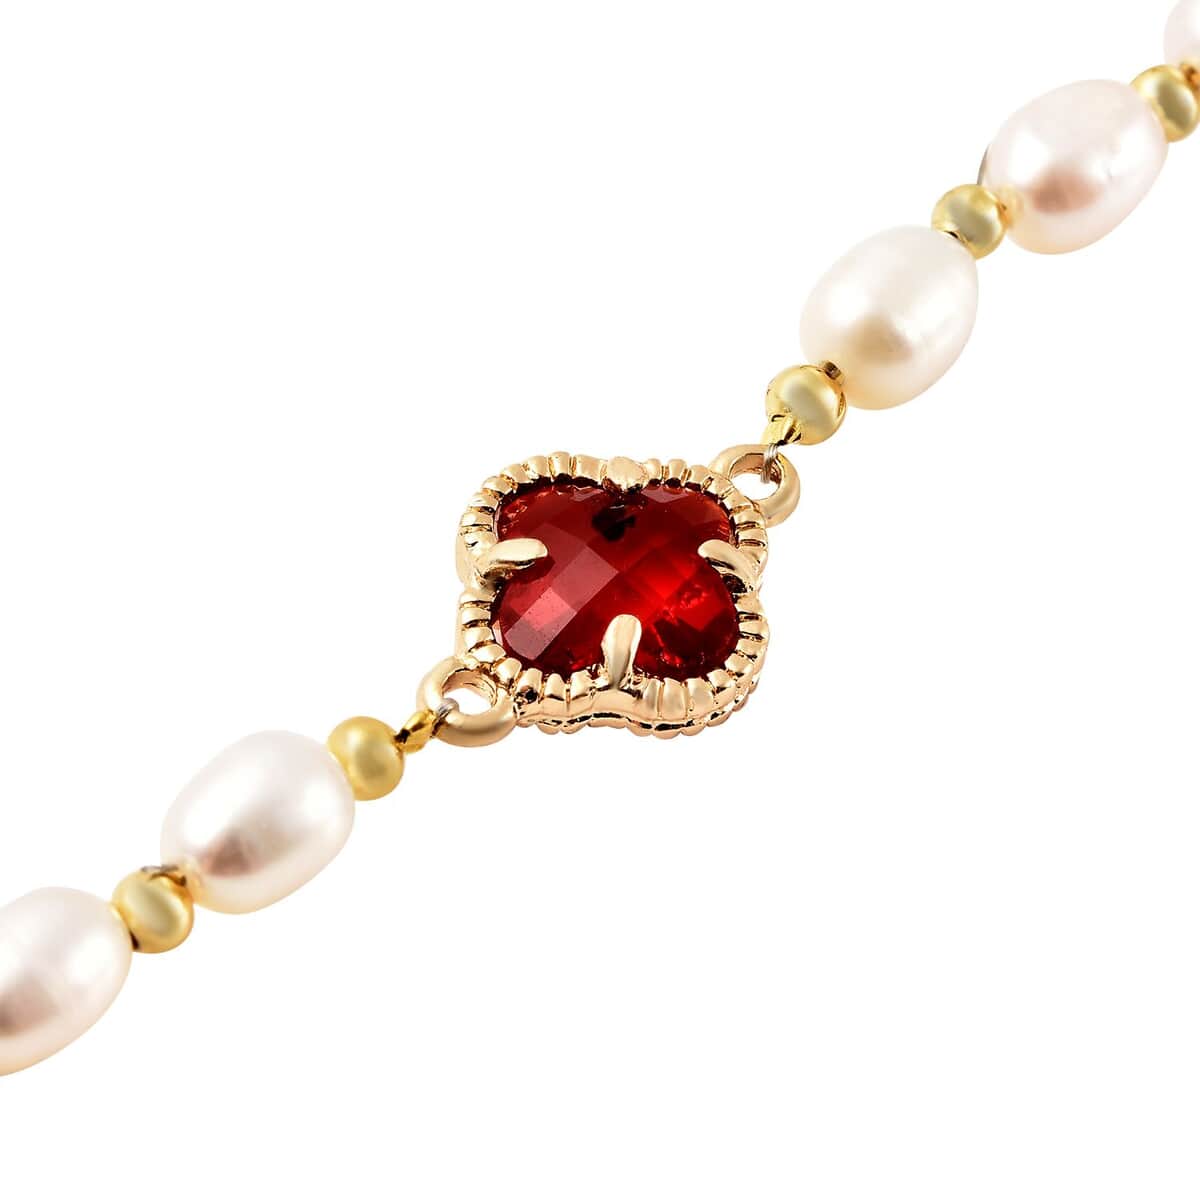 Simulated Ruby and White Freshwater Pearl Bracelet With Four Clover Leaf Charm in Goldtone Lobster Clasp (7.5-9.5-In) image number 3